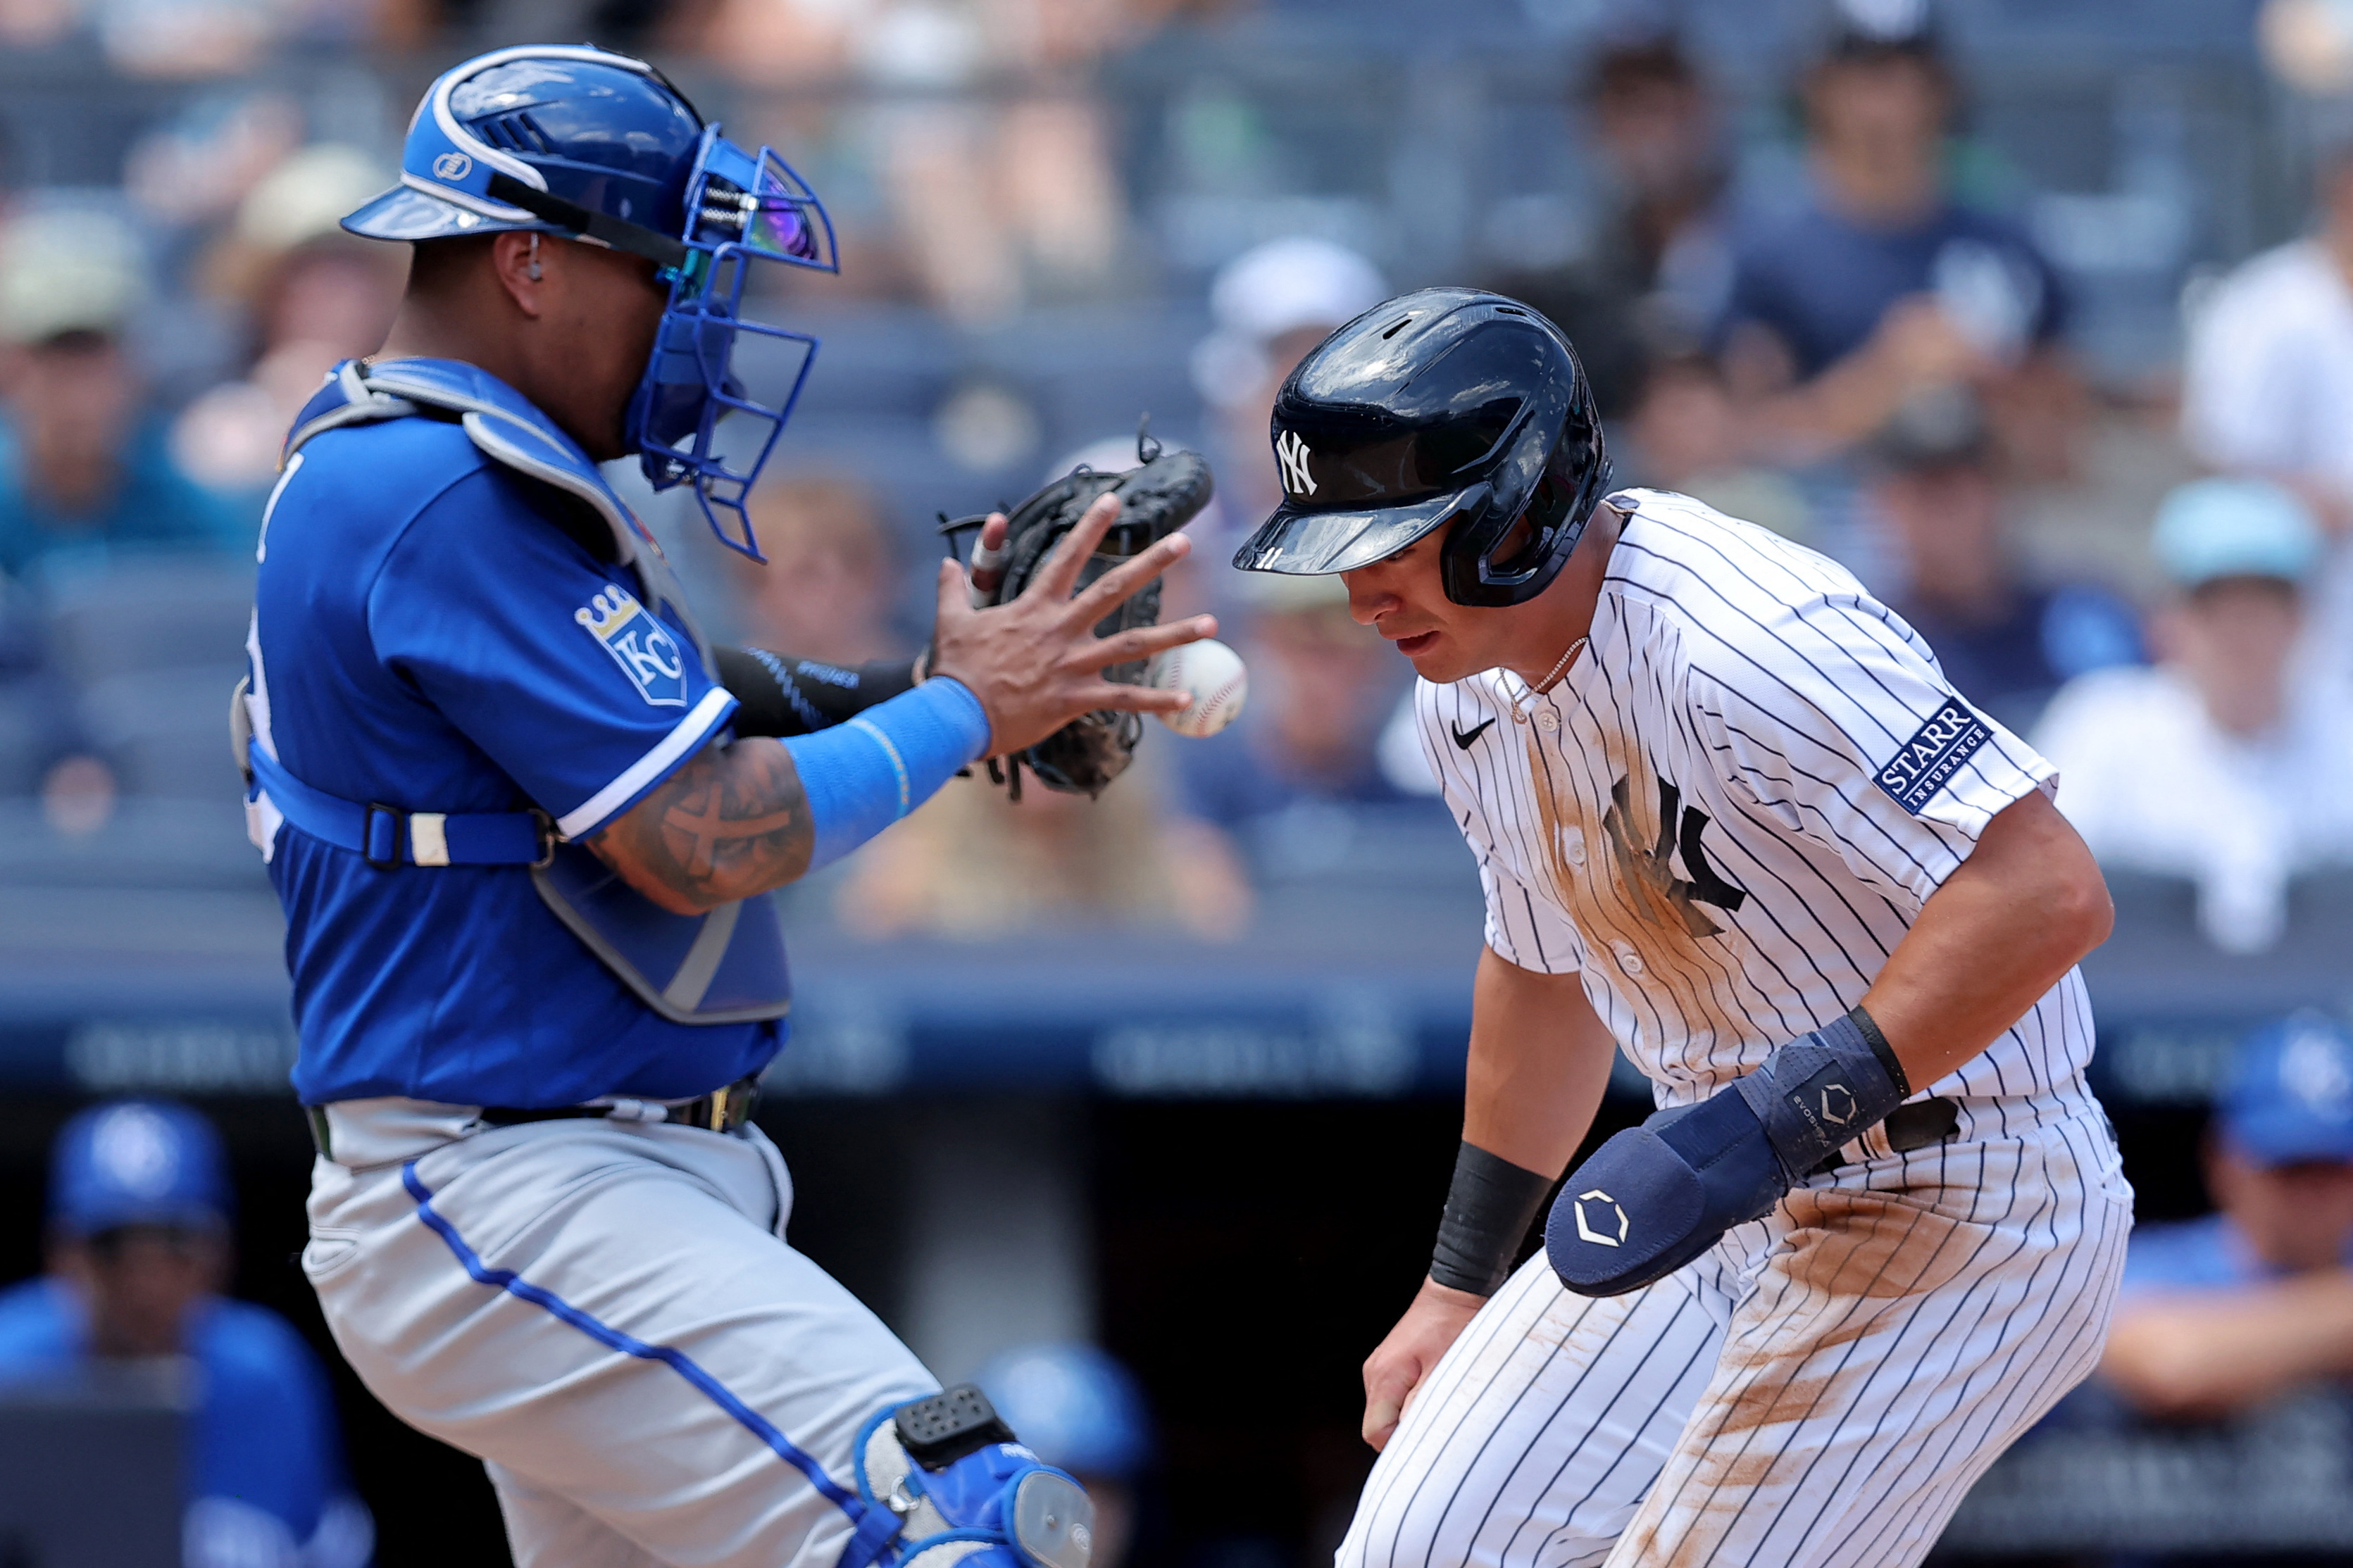 LeMahieu and Stanton homer as the Yankees beat the Royals 5-2. Cole strikes  out 10